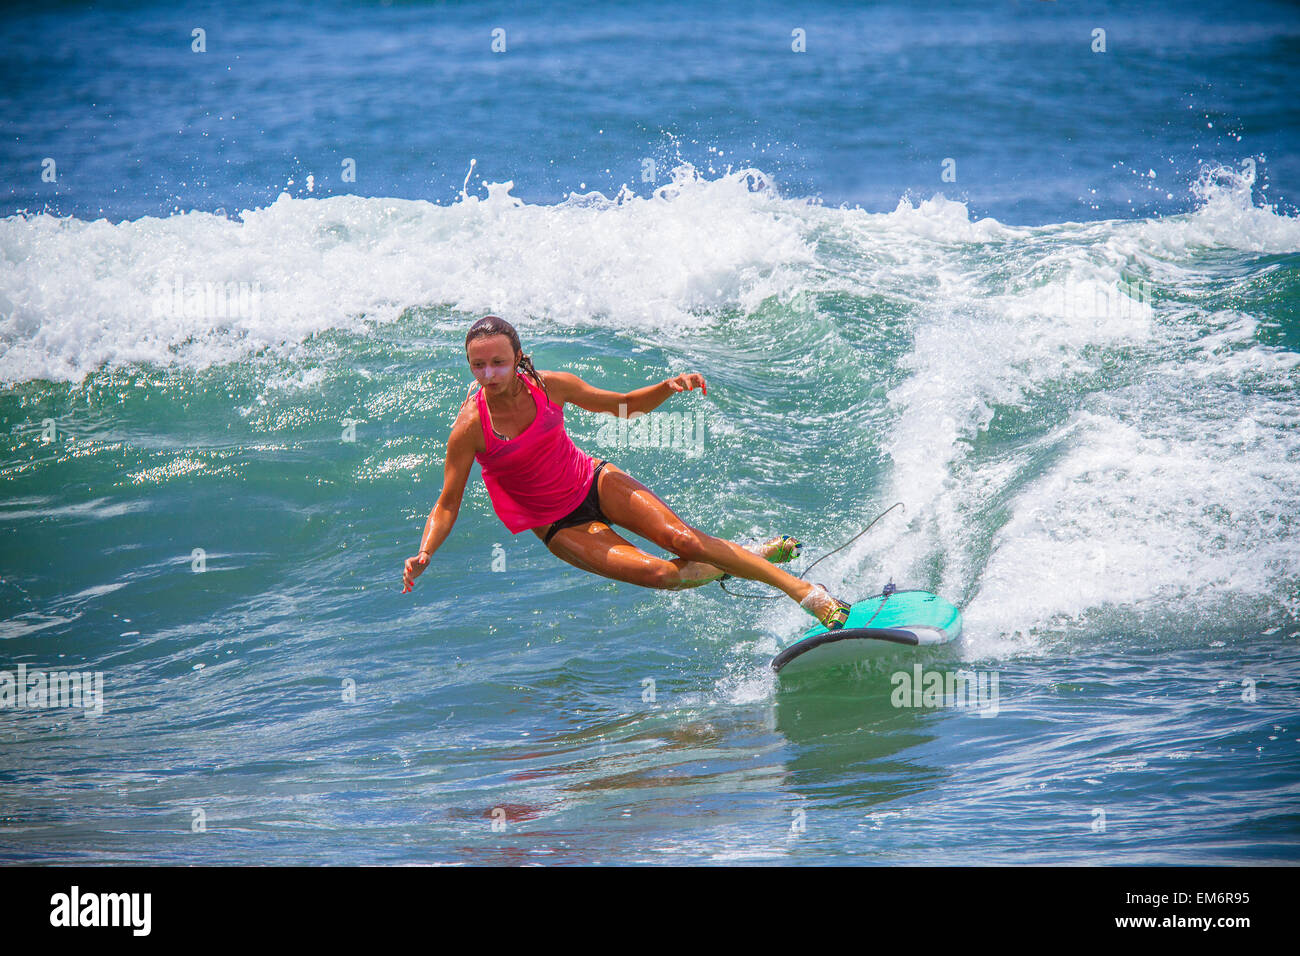 Surfer girl catches wave in high heels. Stock Photo